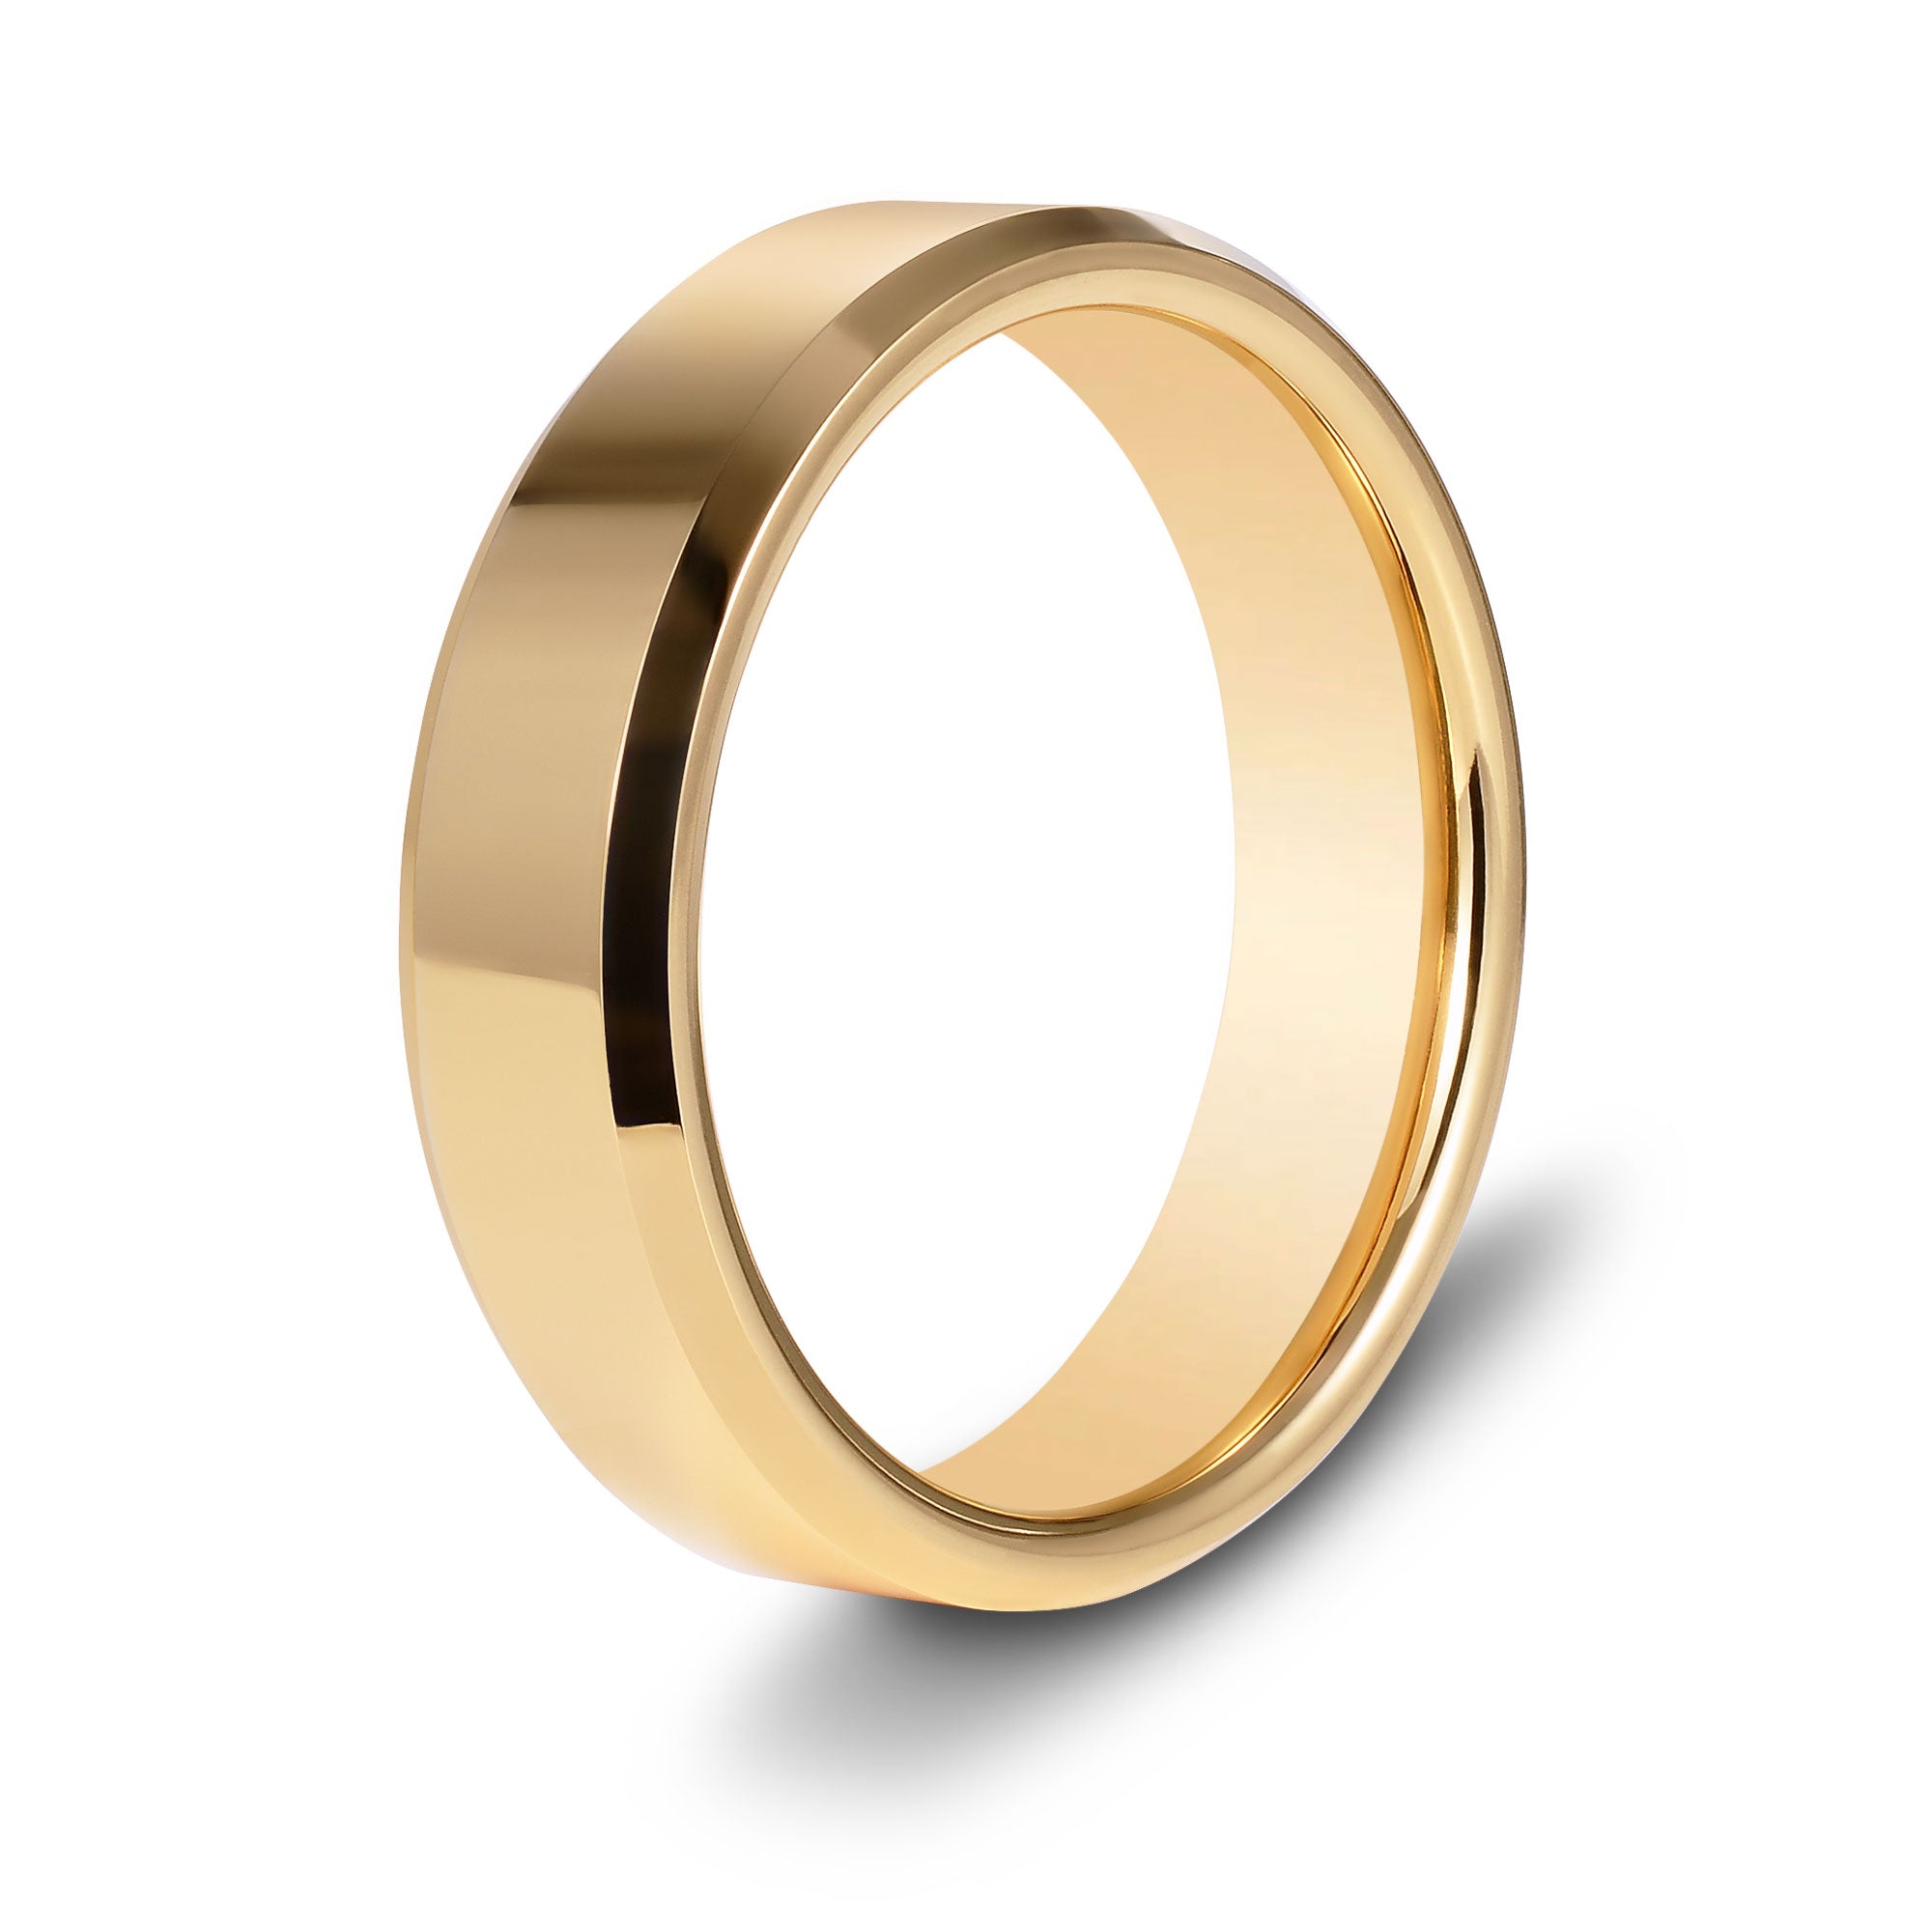 The Refined - Gold Beveled Gloss Finish Tungsten Ring